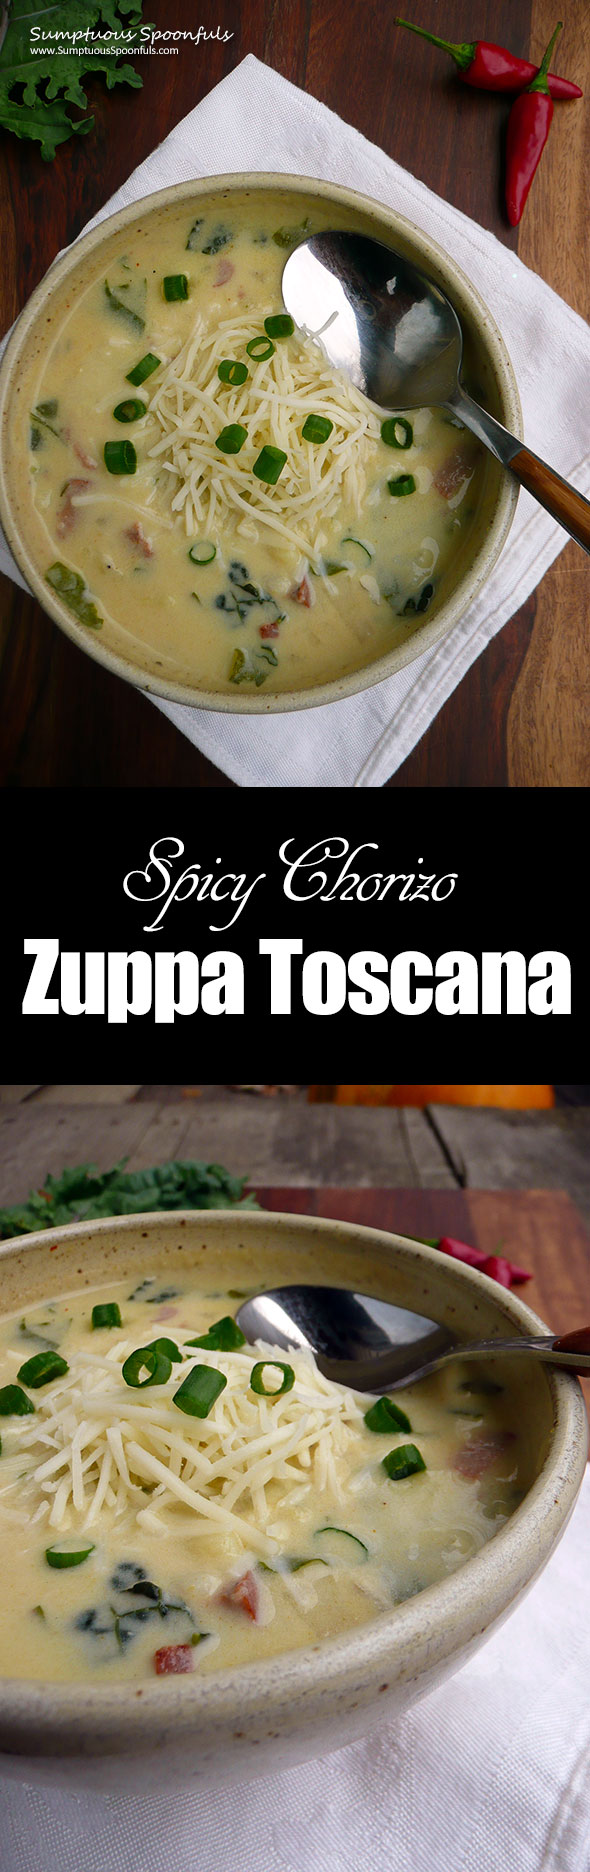 Spicy Chorizo Zuppa Toscana | Sumptuous Spoonfuls